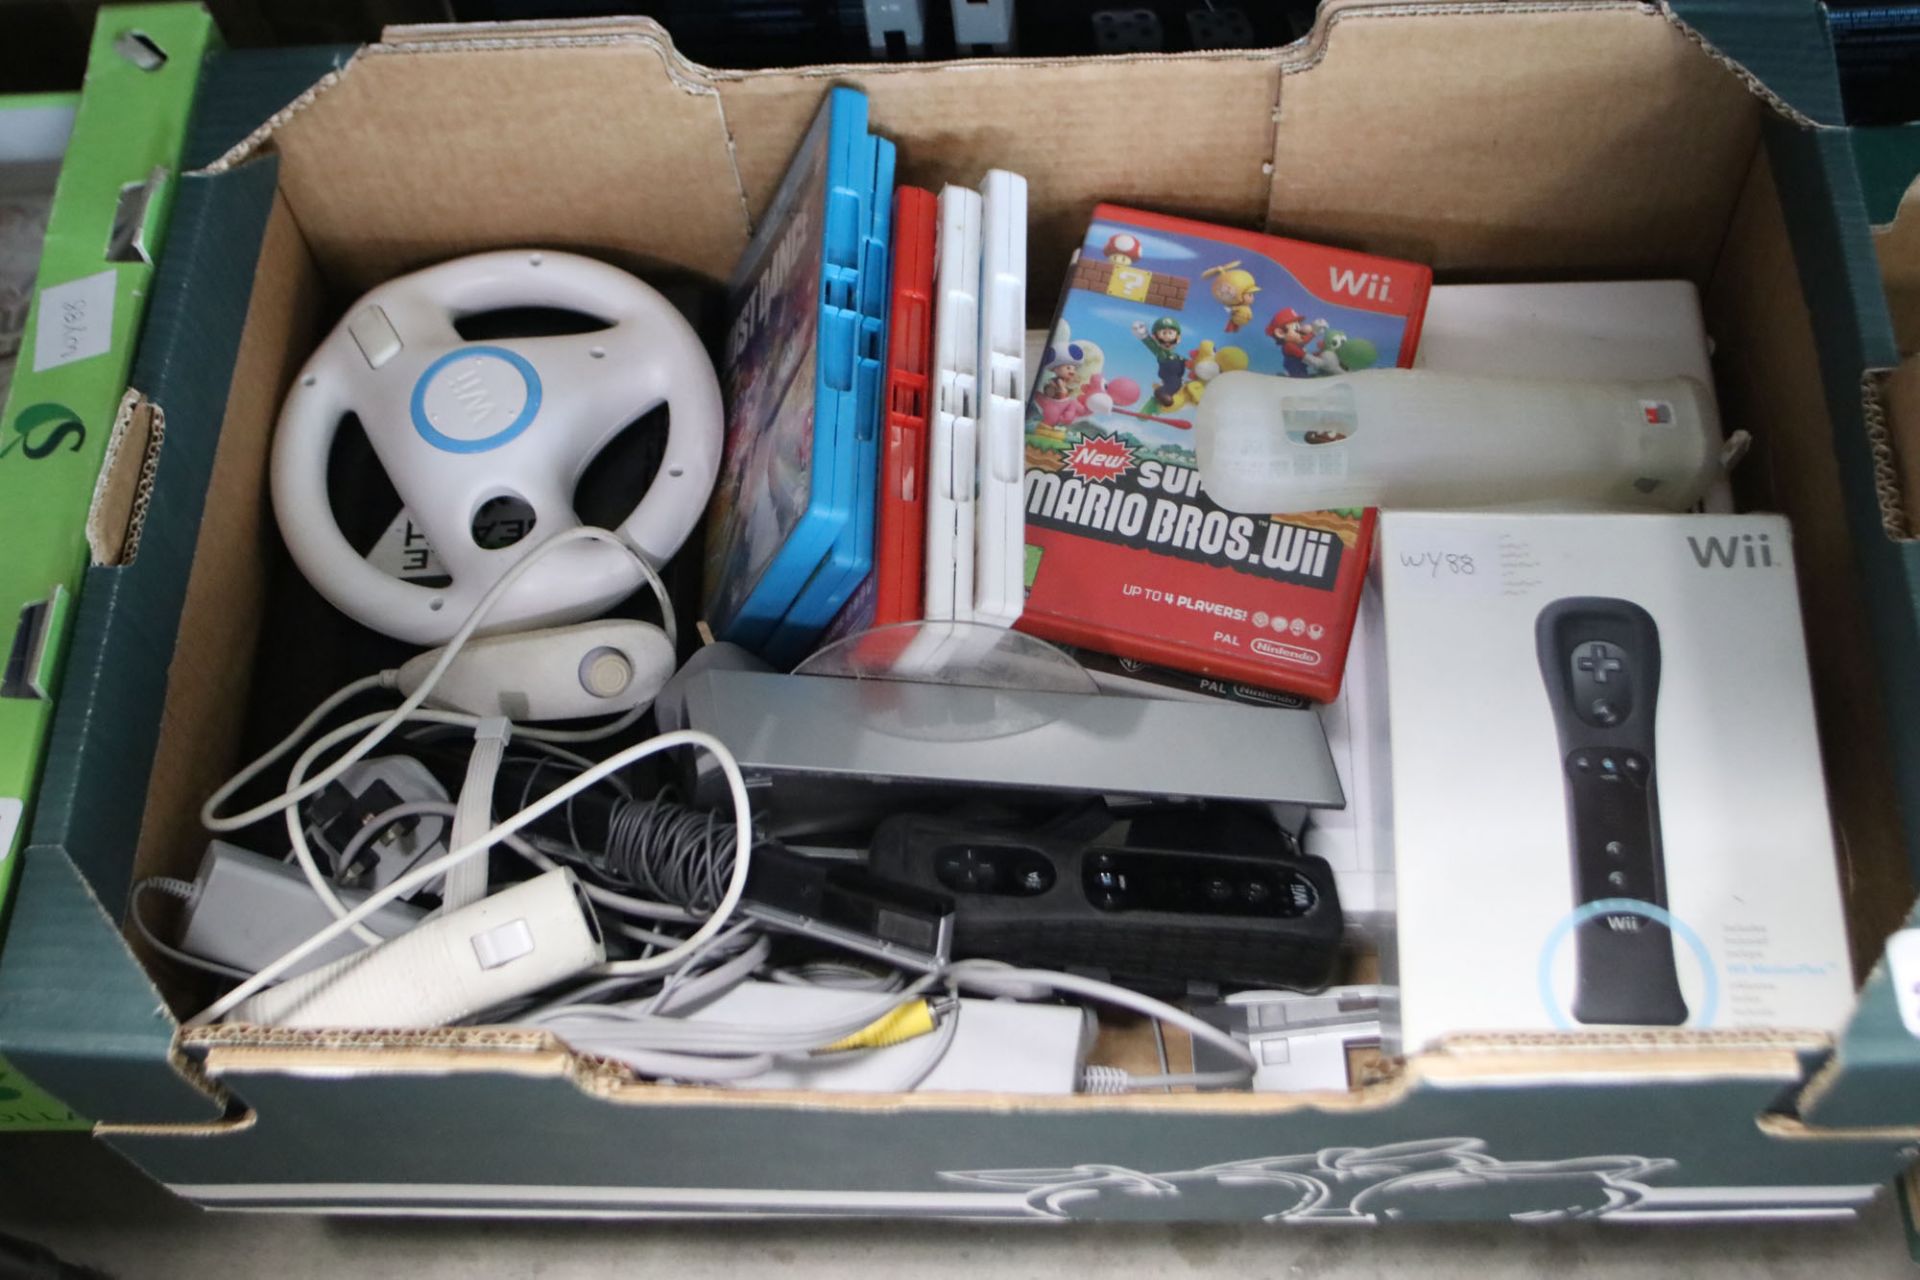 Nintendo Wii console, controllers and other accessories